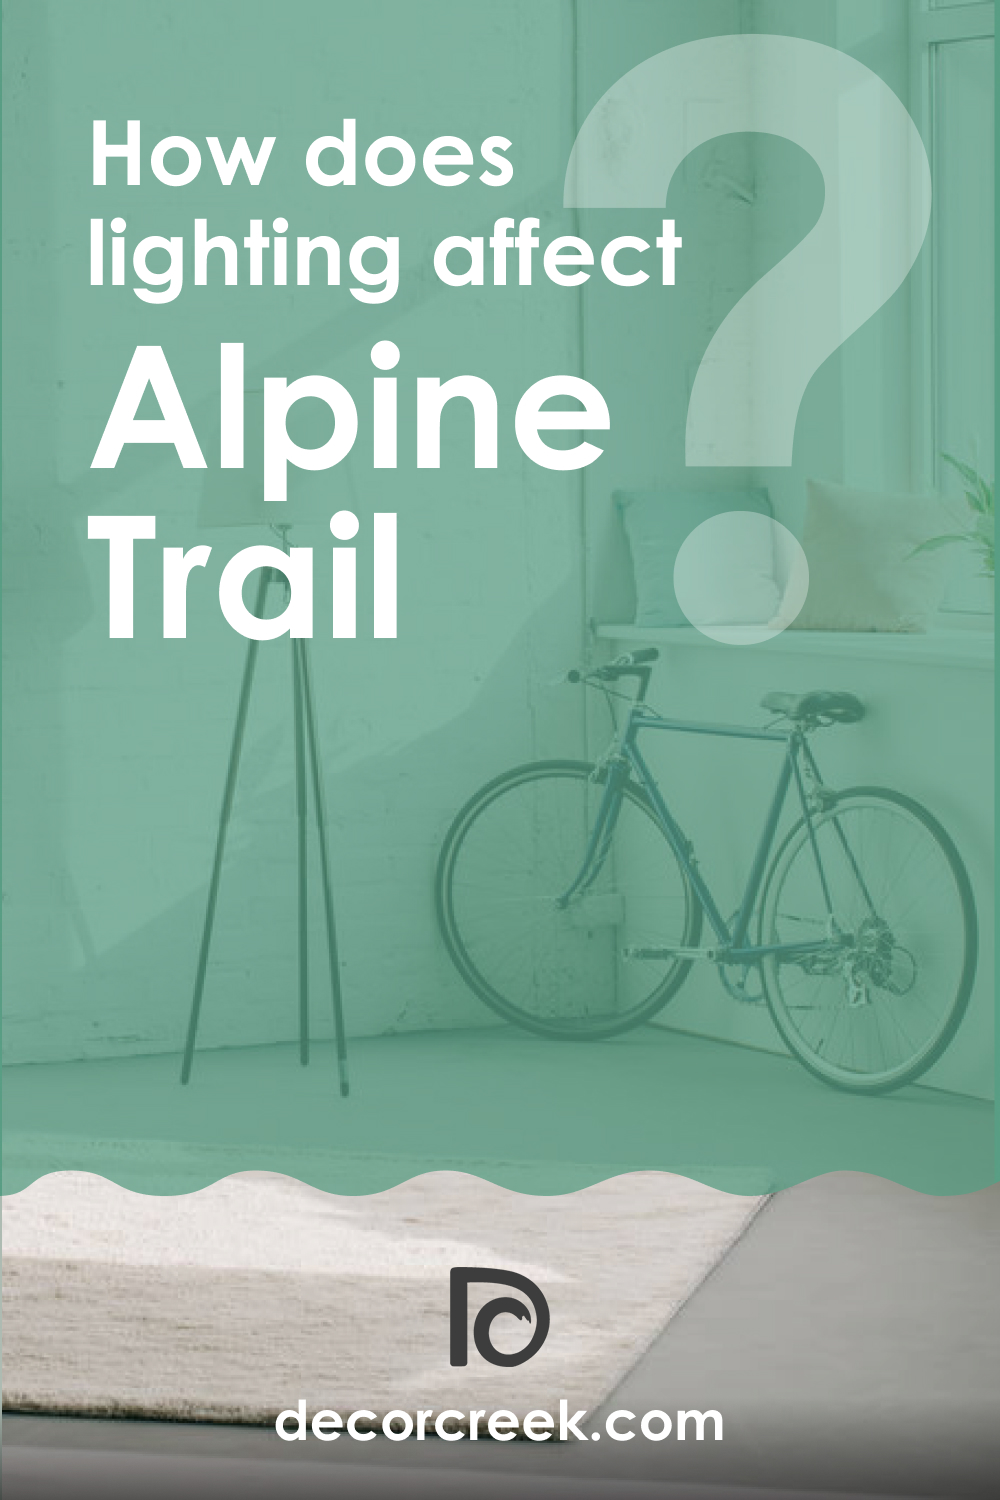 How Does Lighting Affect Alpine Trail 622?